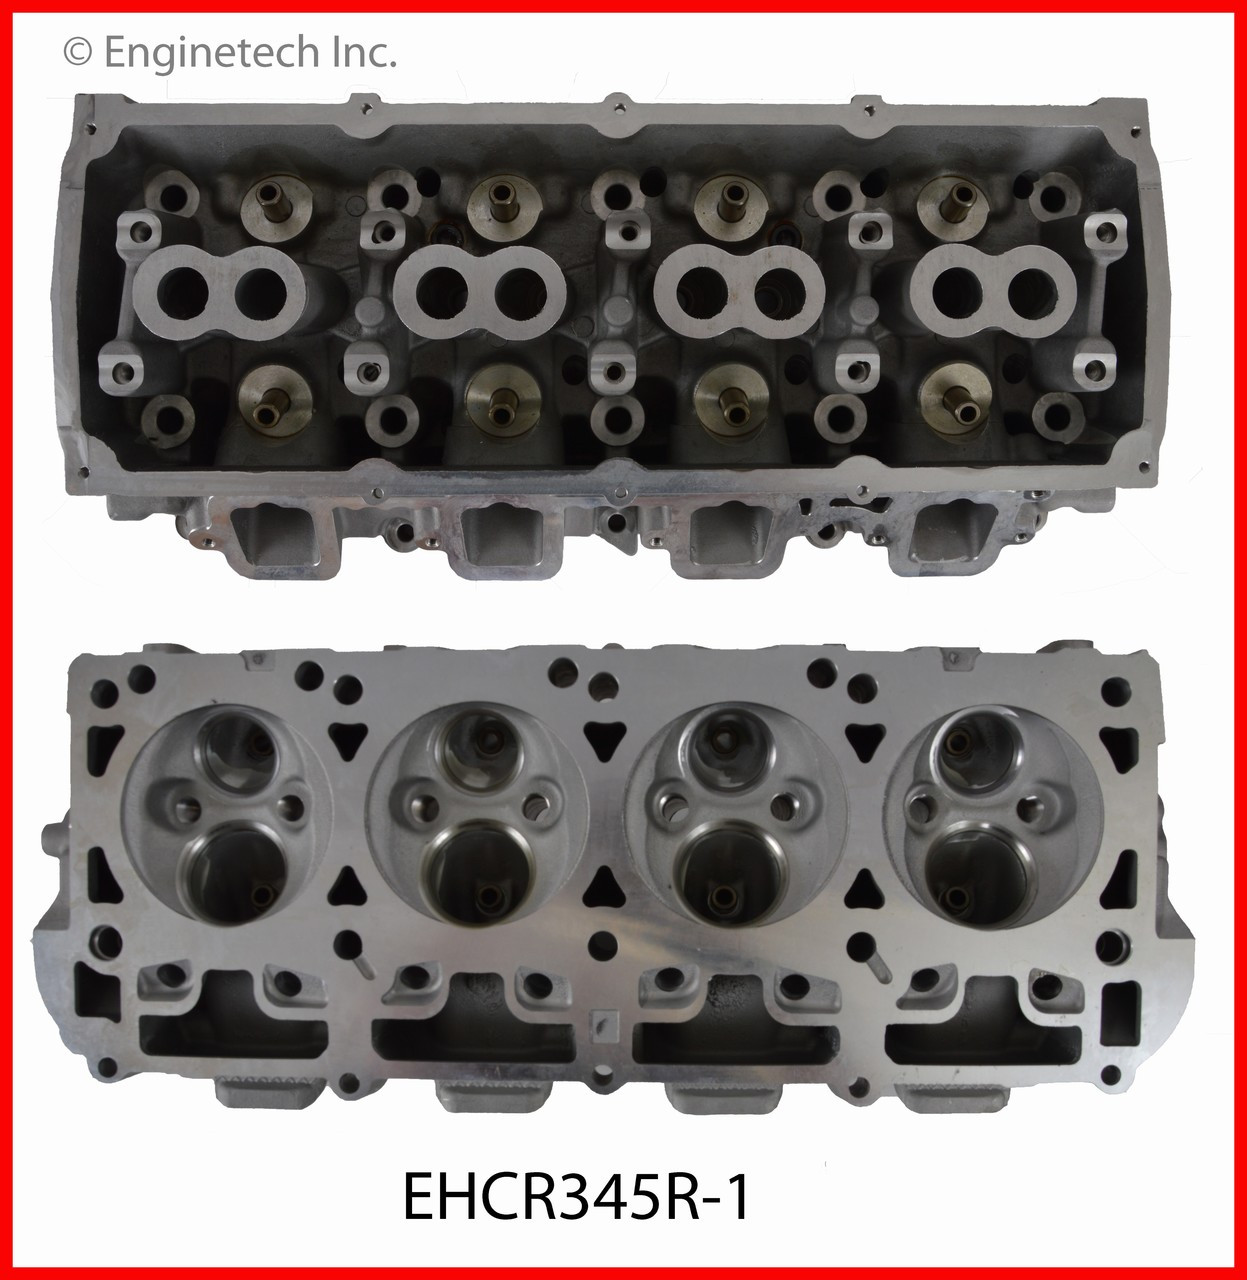 2006 Dodge Charger 5.7L Engine Cylinder Head EHCR345R-1 -16